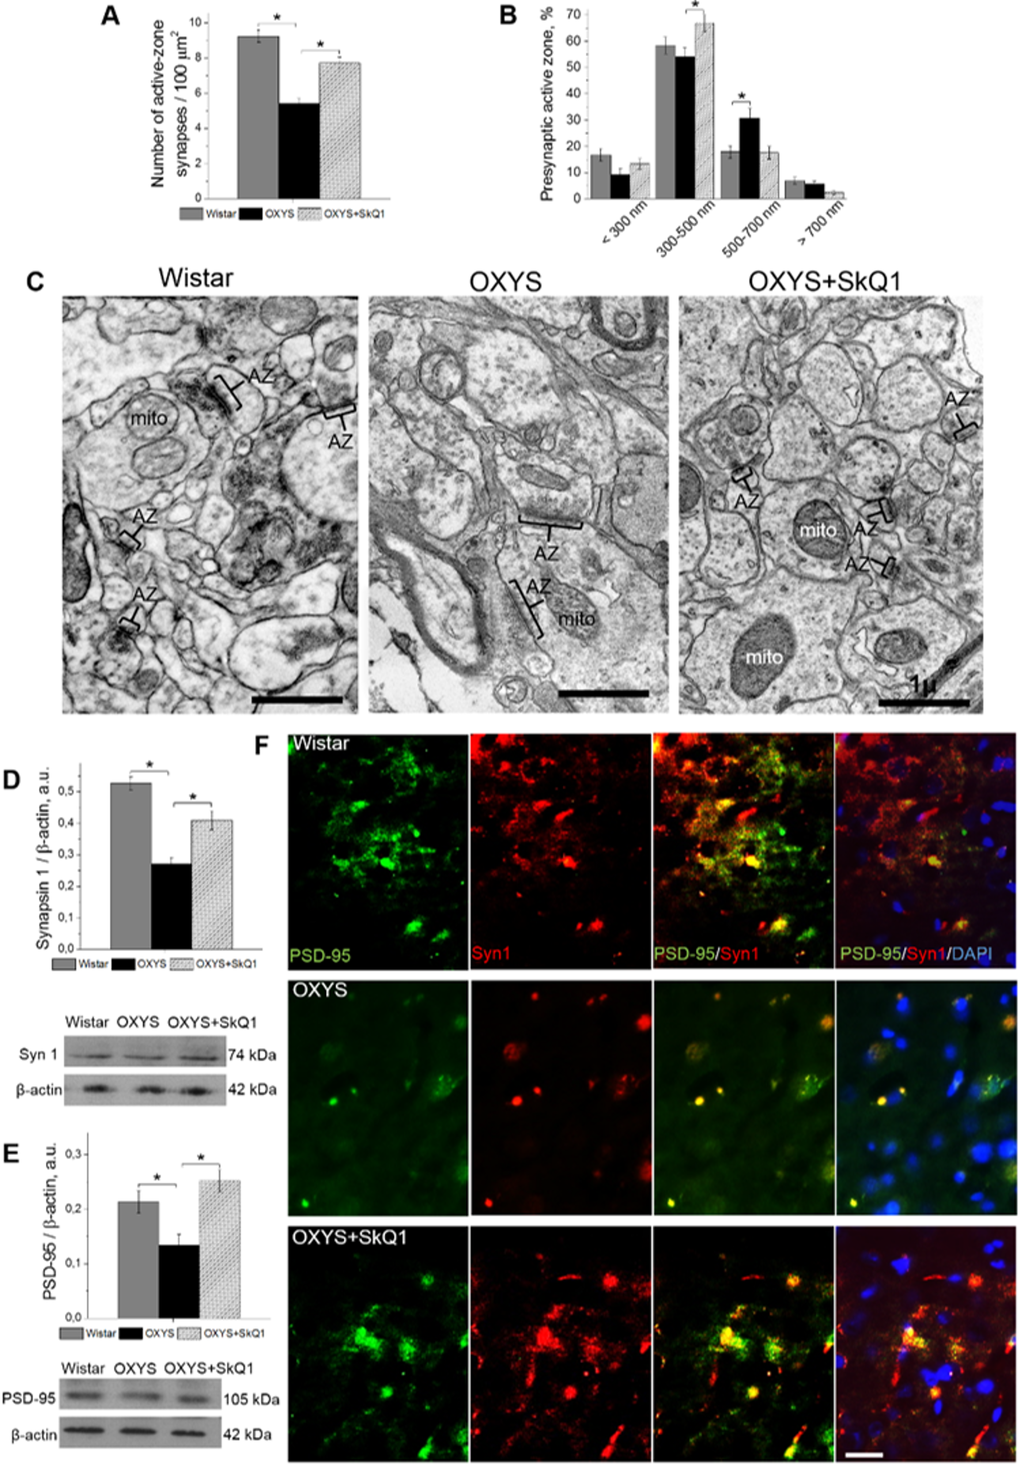 SkQ1 increased the number of presynaptic active zones in the hippocampal CA1 region and increased the levels of pre- and postsynaptic proteins in the hippocampus. (A) The low number of presynaptic active zones in the hippocampus of OXYS rats (n=4; pB) The elevated number of large presynaptic active zones (judging by the length of an active zone in the micrographs) in the hippocampus of OXYS rats (pC) The electron micrographs show an active zone (AZ) in the CA1 region of the hippocampus in a Wistar rat and untreated and SkQ1-treated OXYS rats. (D, E) Synapsin I and PSD-95 levels were low in the hippocampus of untreated OXYS rats (pF) Immunohistochemical staining (n=4) of synapsin I (red) and PSD-95 (green). The DAPI (blue) staining shows cell nuclei. The scale bar is 1 µm in (C) and 5 µm in (F). Mito: mitochondria, Syn I: synapsin I, a.u.: arbitrary units. The data are shown as mean ± SEM. Statistical significance (p